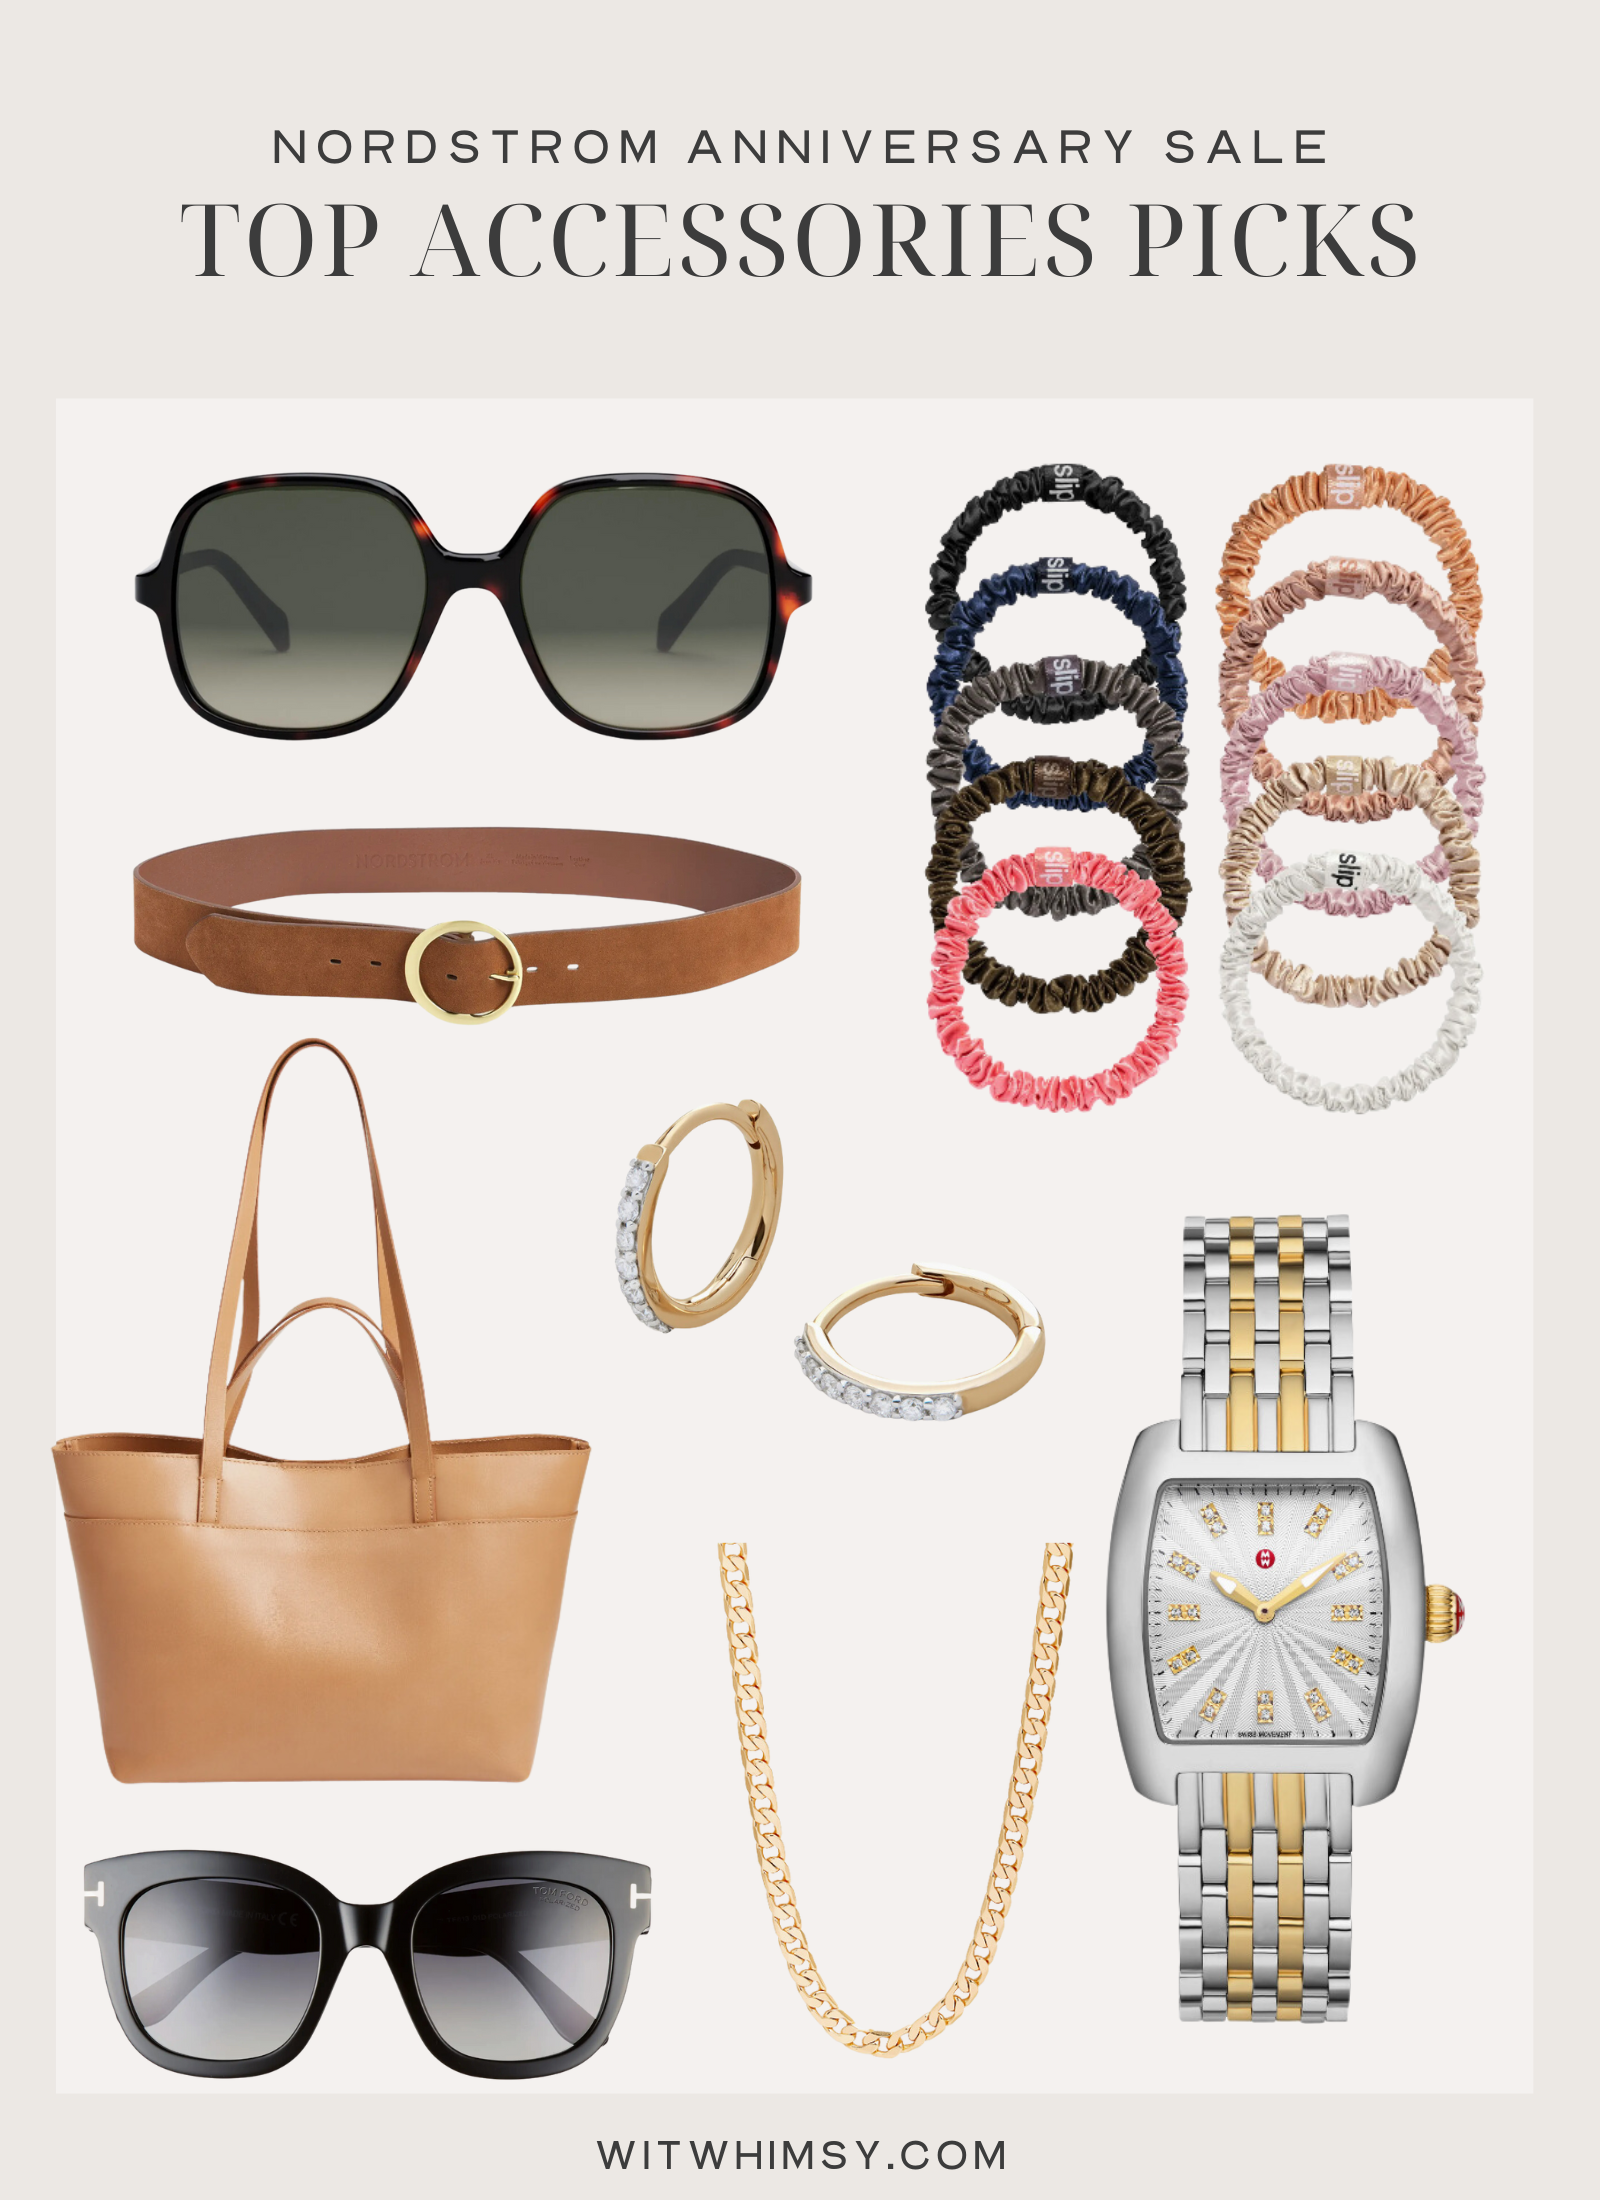 Collage of accessories and jewelry from Nordstrom Anniversary Sale